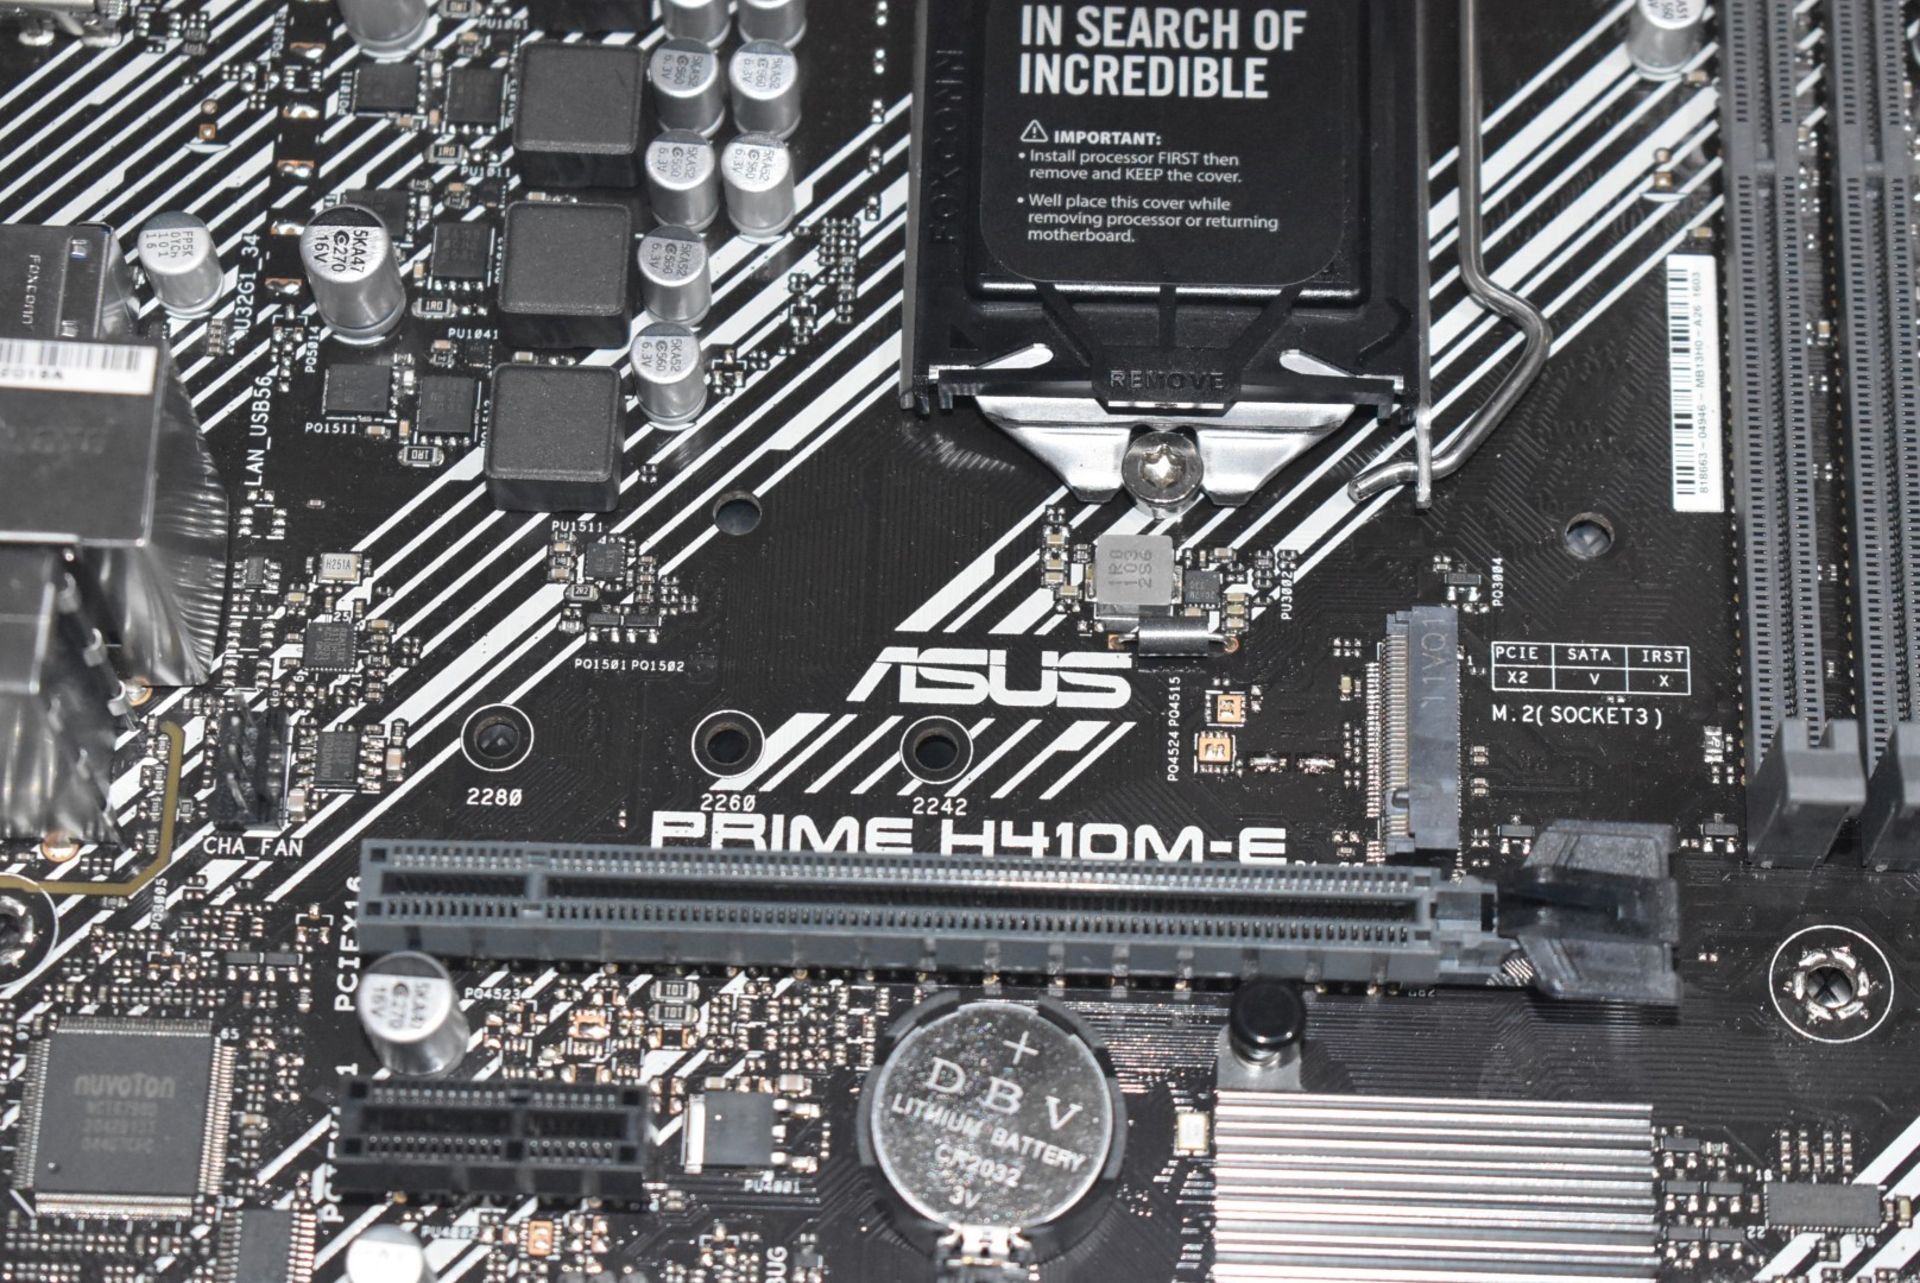 1 x Asus Prime H410M-E Intel LGA1200 Motherboard - Boxed With Accessories - Image 5 of 6